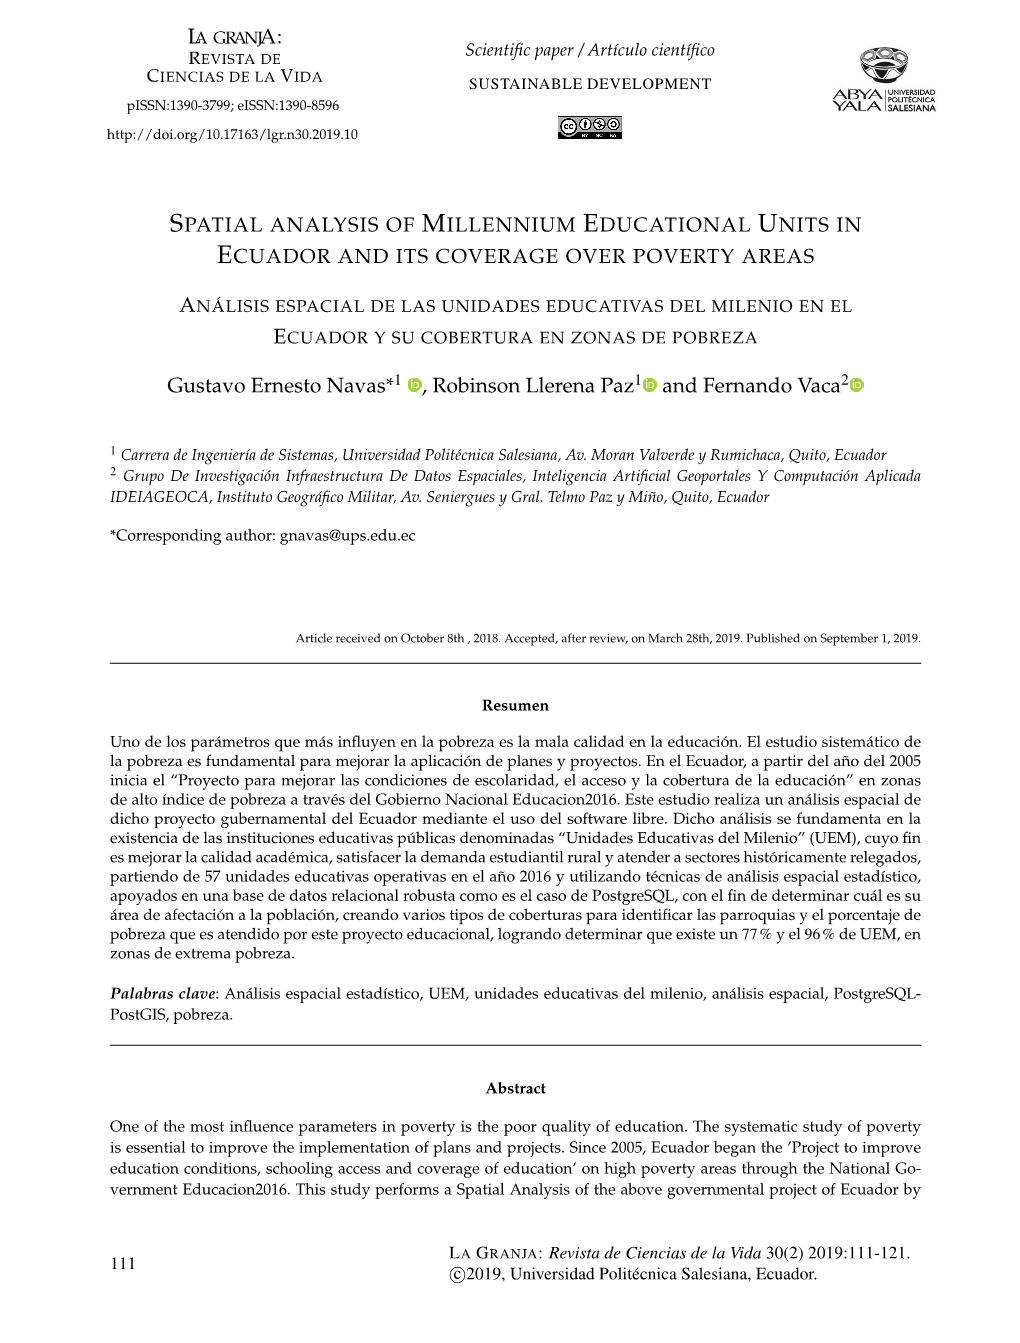 Spatial Analysis of Millennium Educational Units In